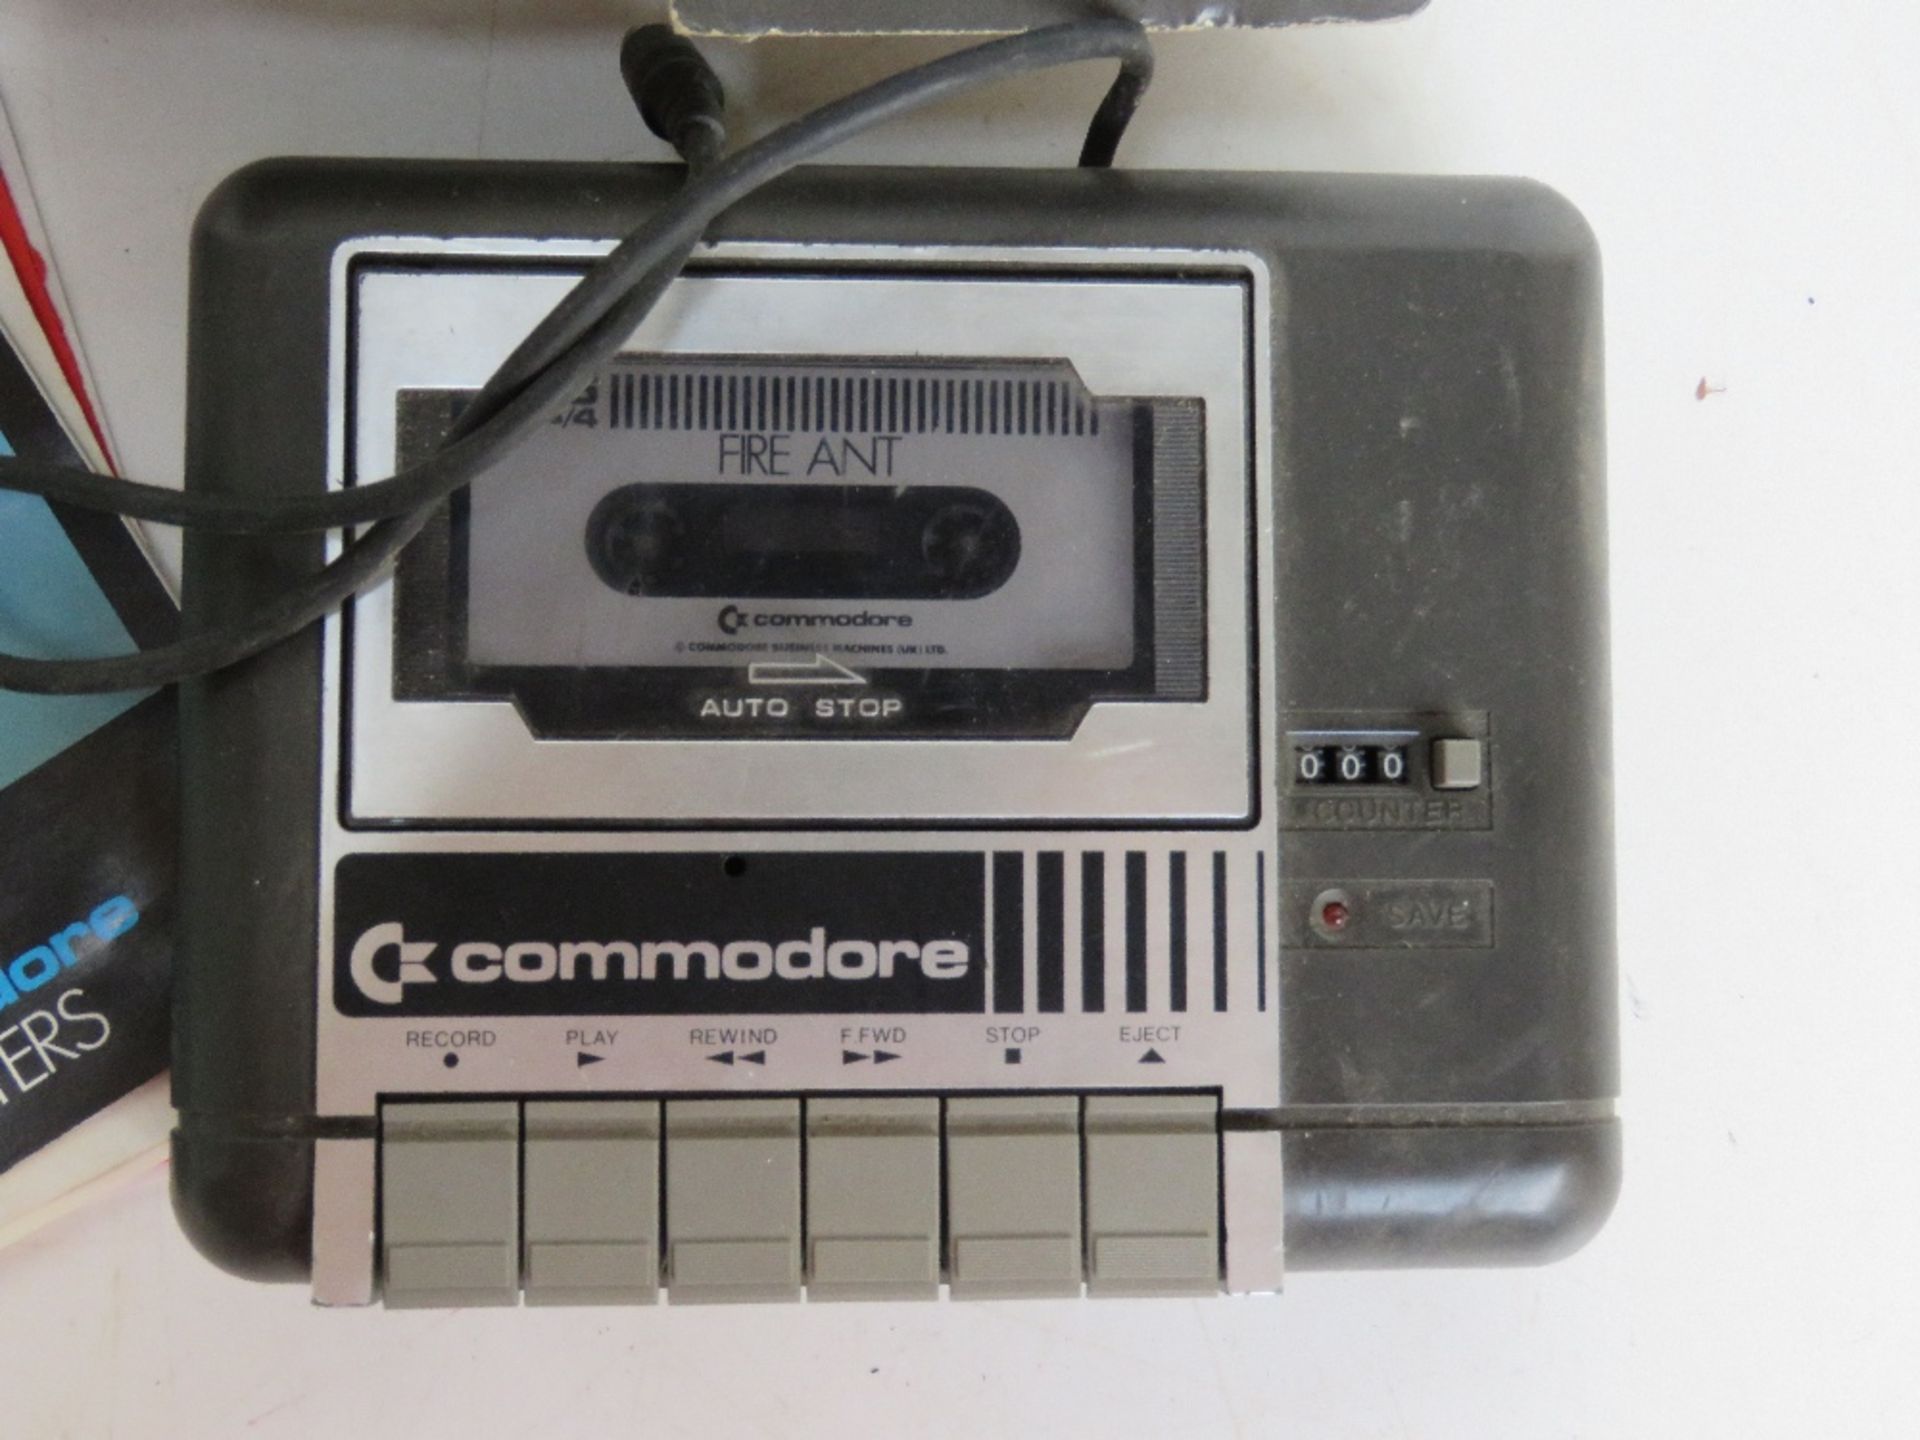 A Commodore Datassette 1531 with original box and user guide. - Image 2 of 4